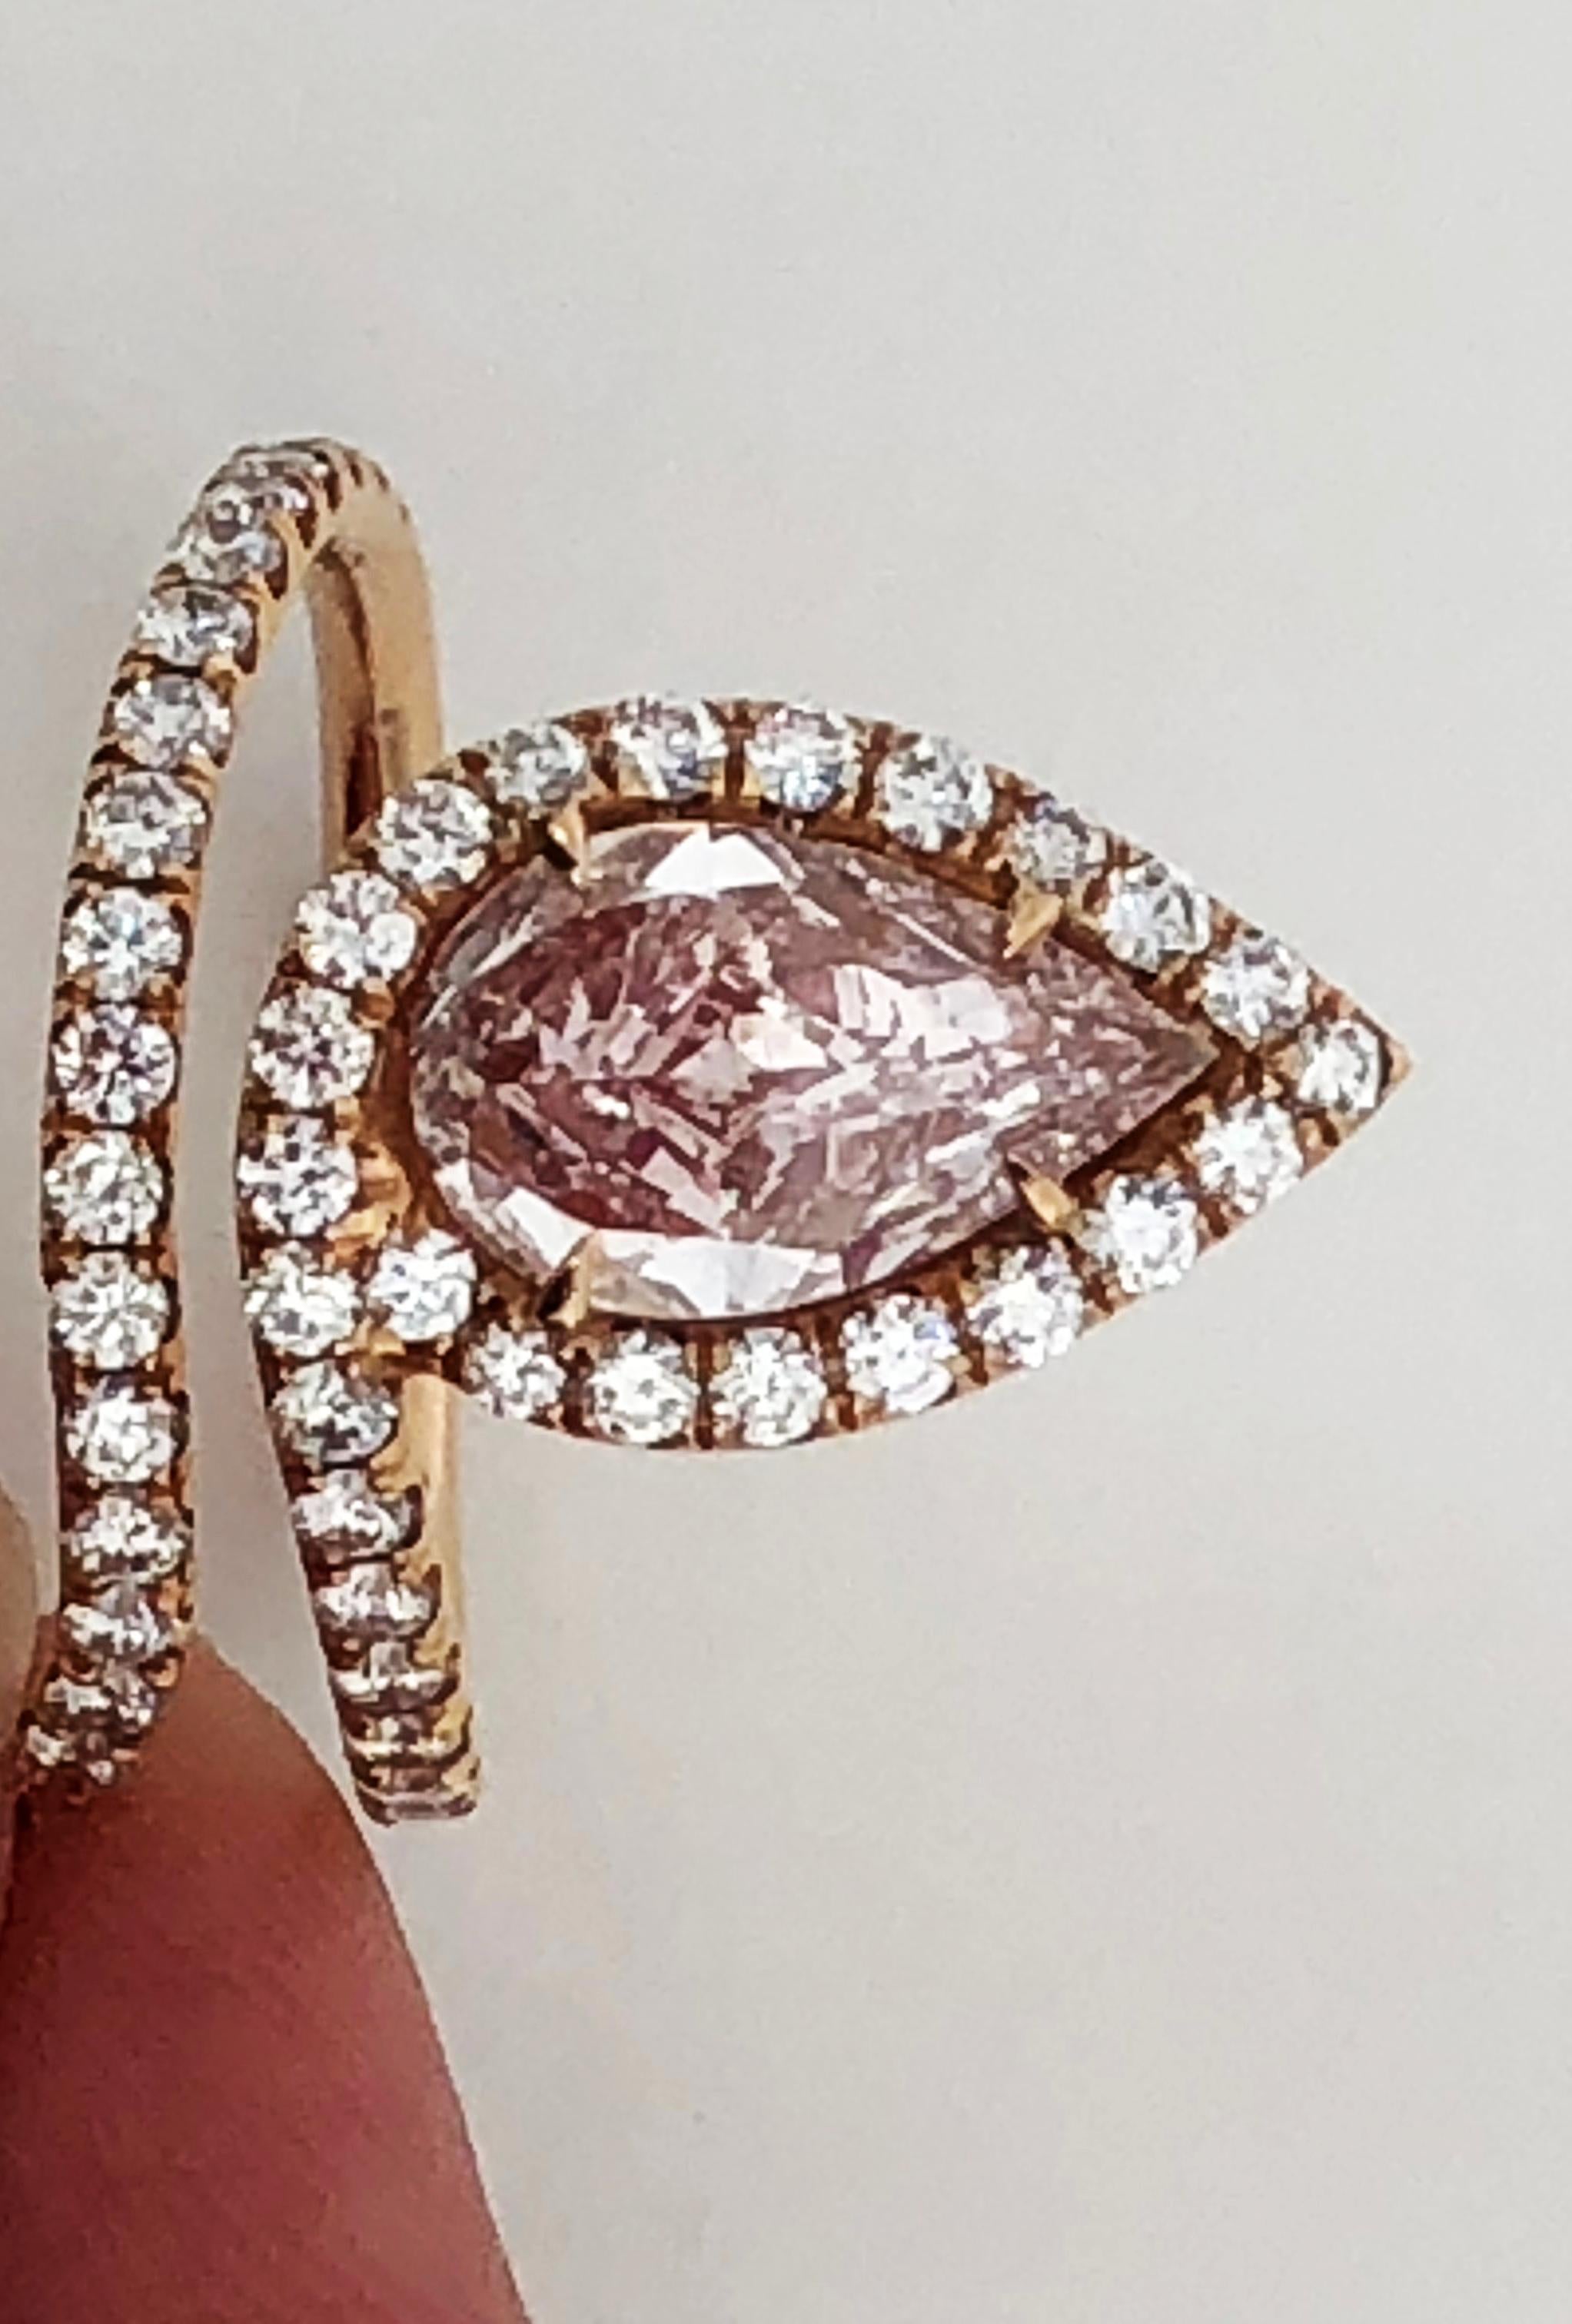 Gorgeous natural fancy light pink pear shape diamond weighing 1.72 ct with 1.00 ct of white diamond rounds in a handcrafted 18k rose gold mounting.   VS1 clarity. GIA certificate available.  Stone is exceptionally spready and has very strong color. 